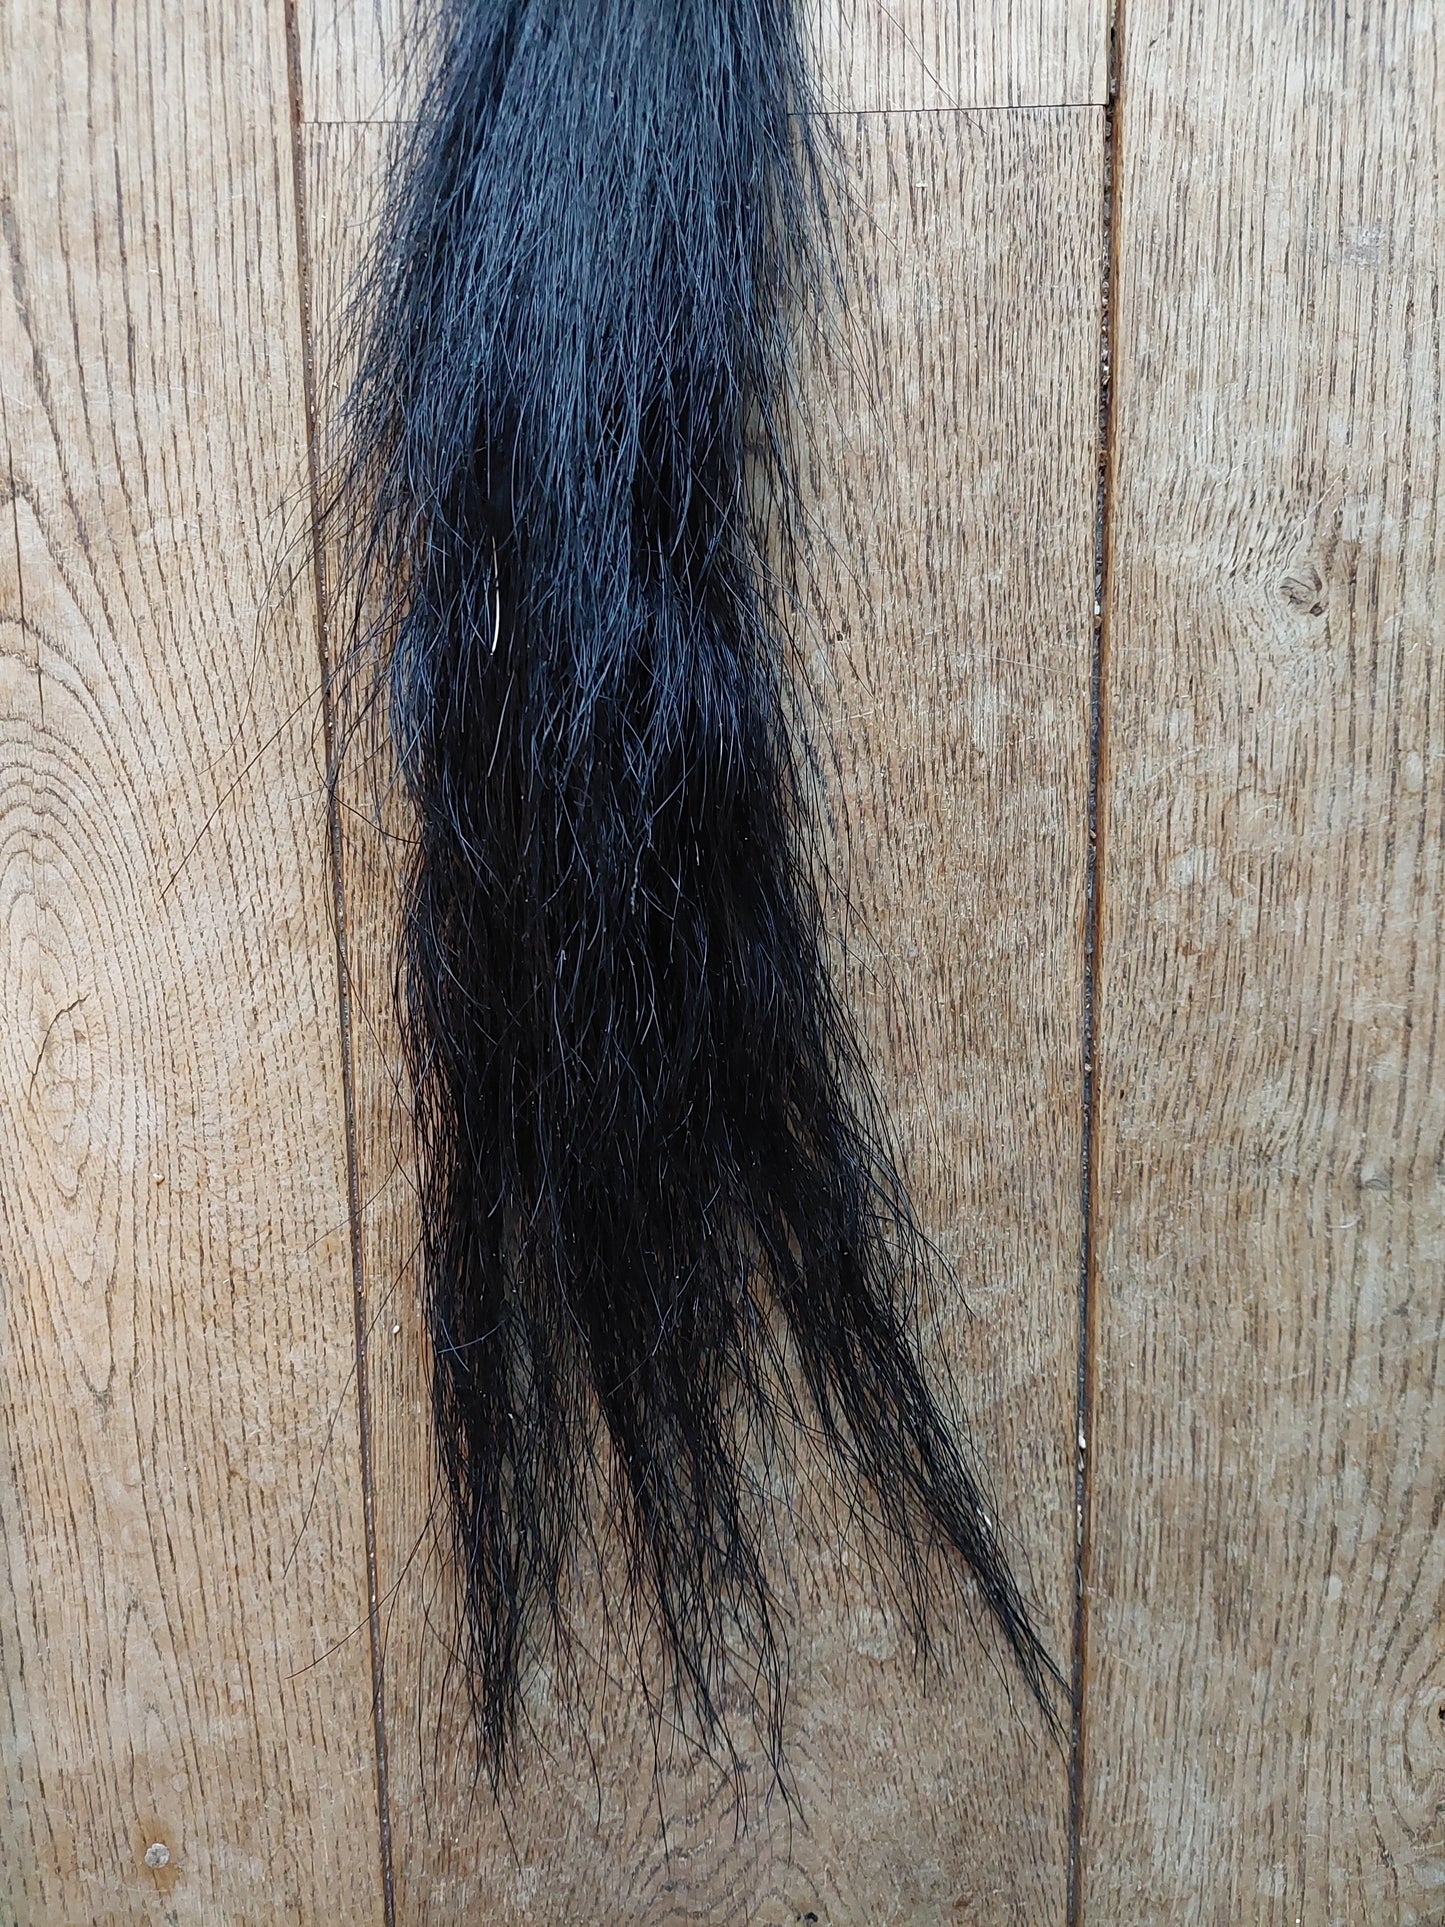 Horse tail #1